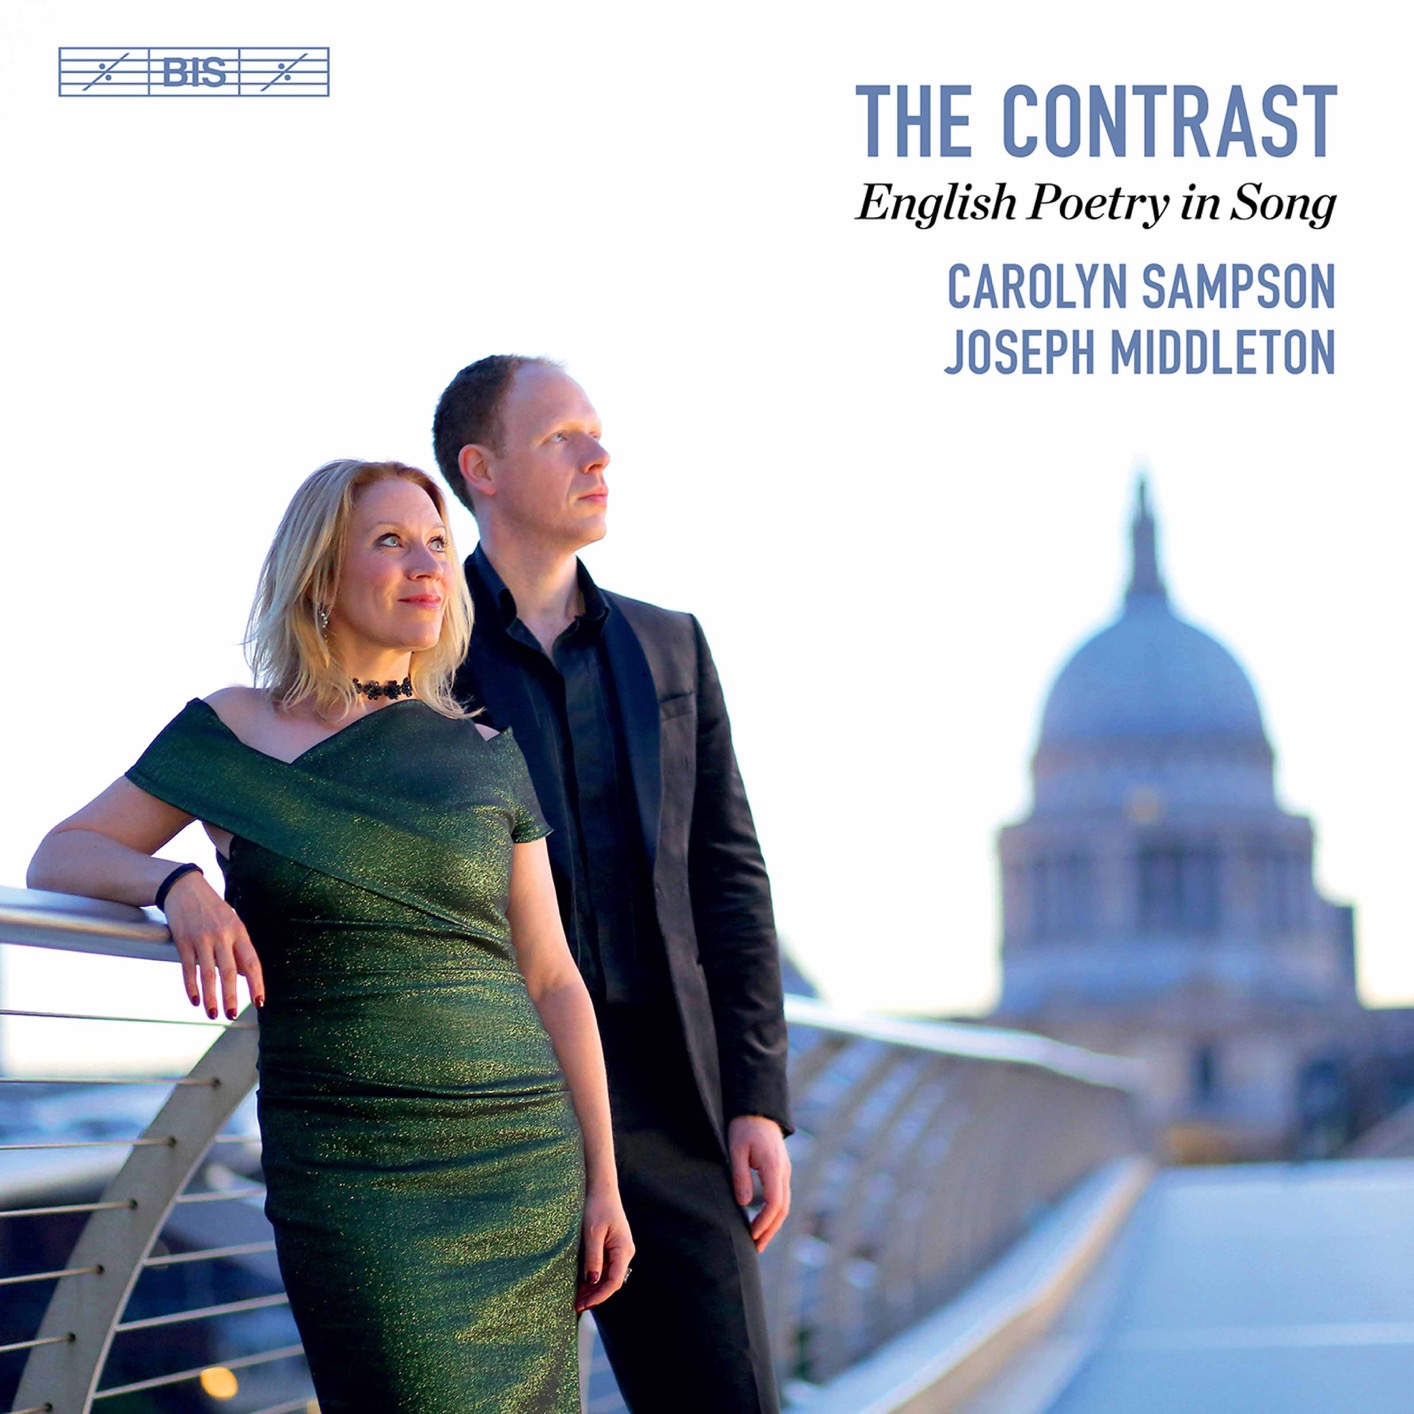 Carolyn Sampson & Joseph Middleton - The Contrast: English Poetry in Song (2020) [FLAC 24bit/96kHz]